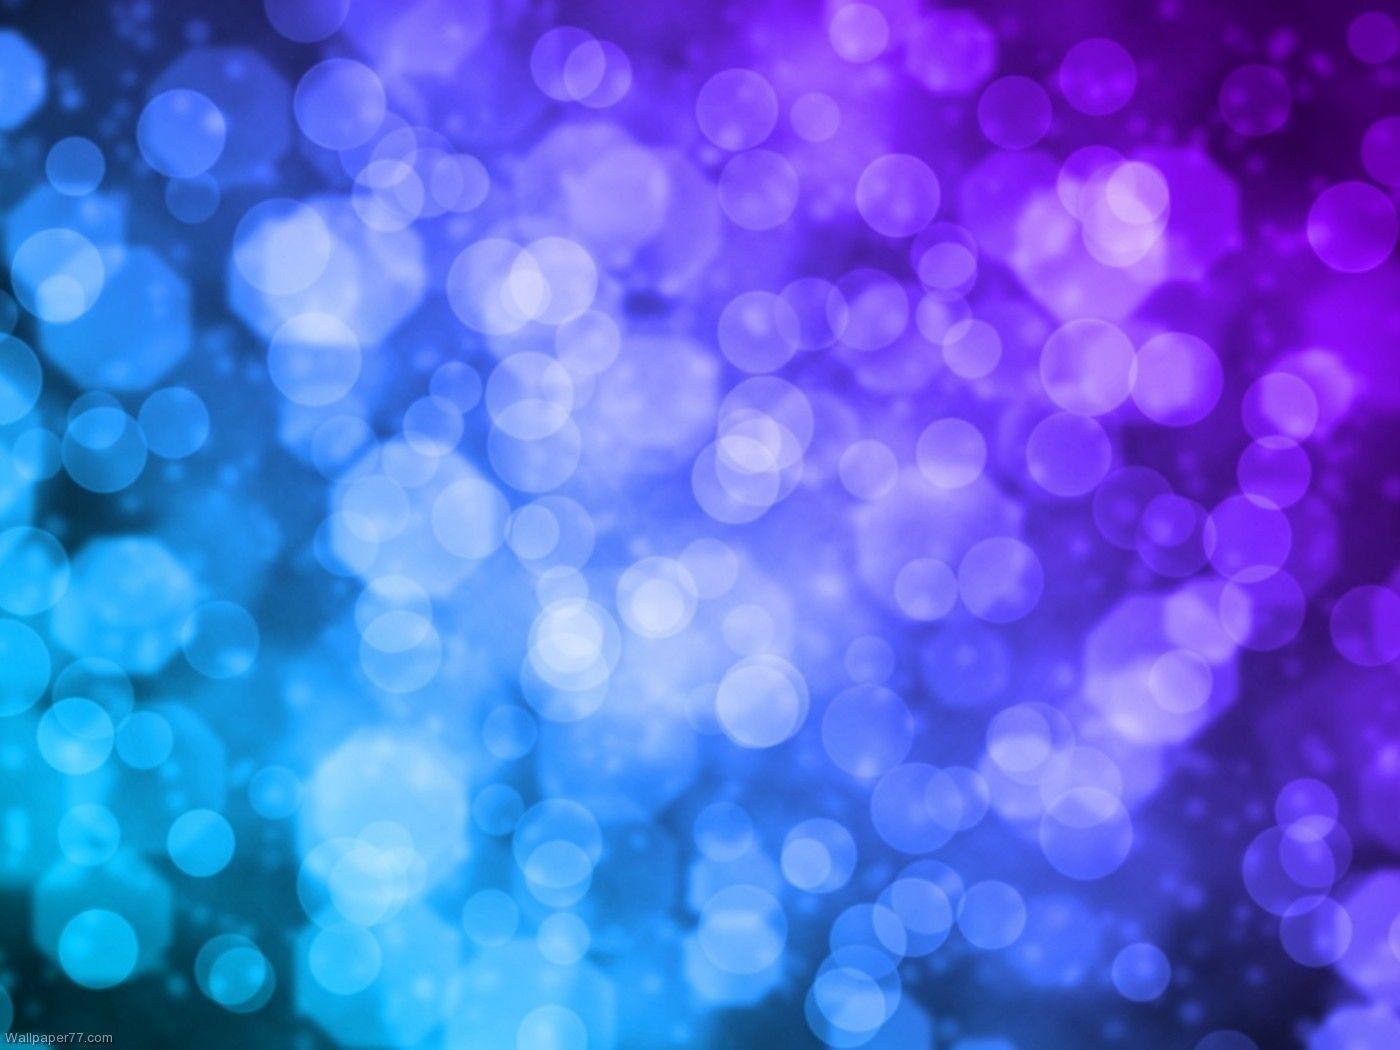 Wallpaper For > Purple And Blue Background